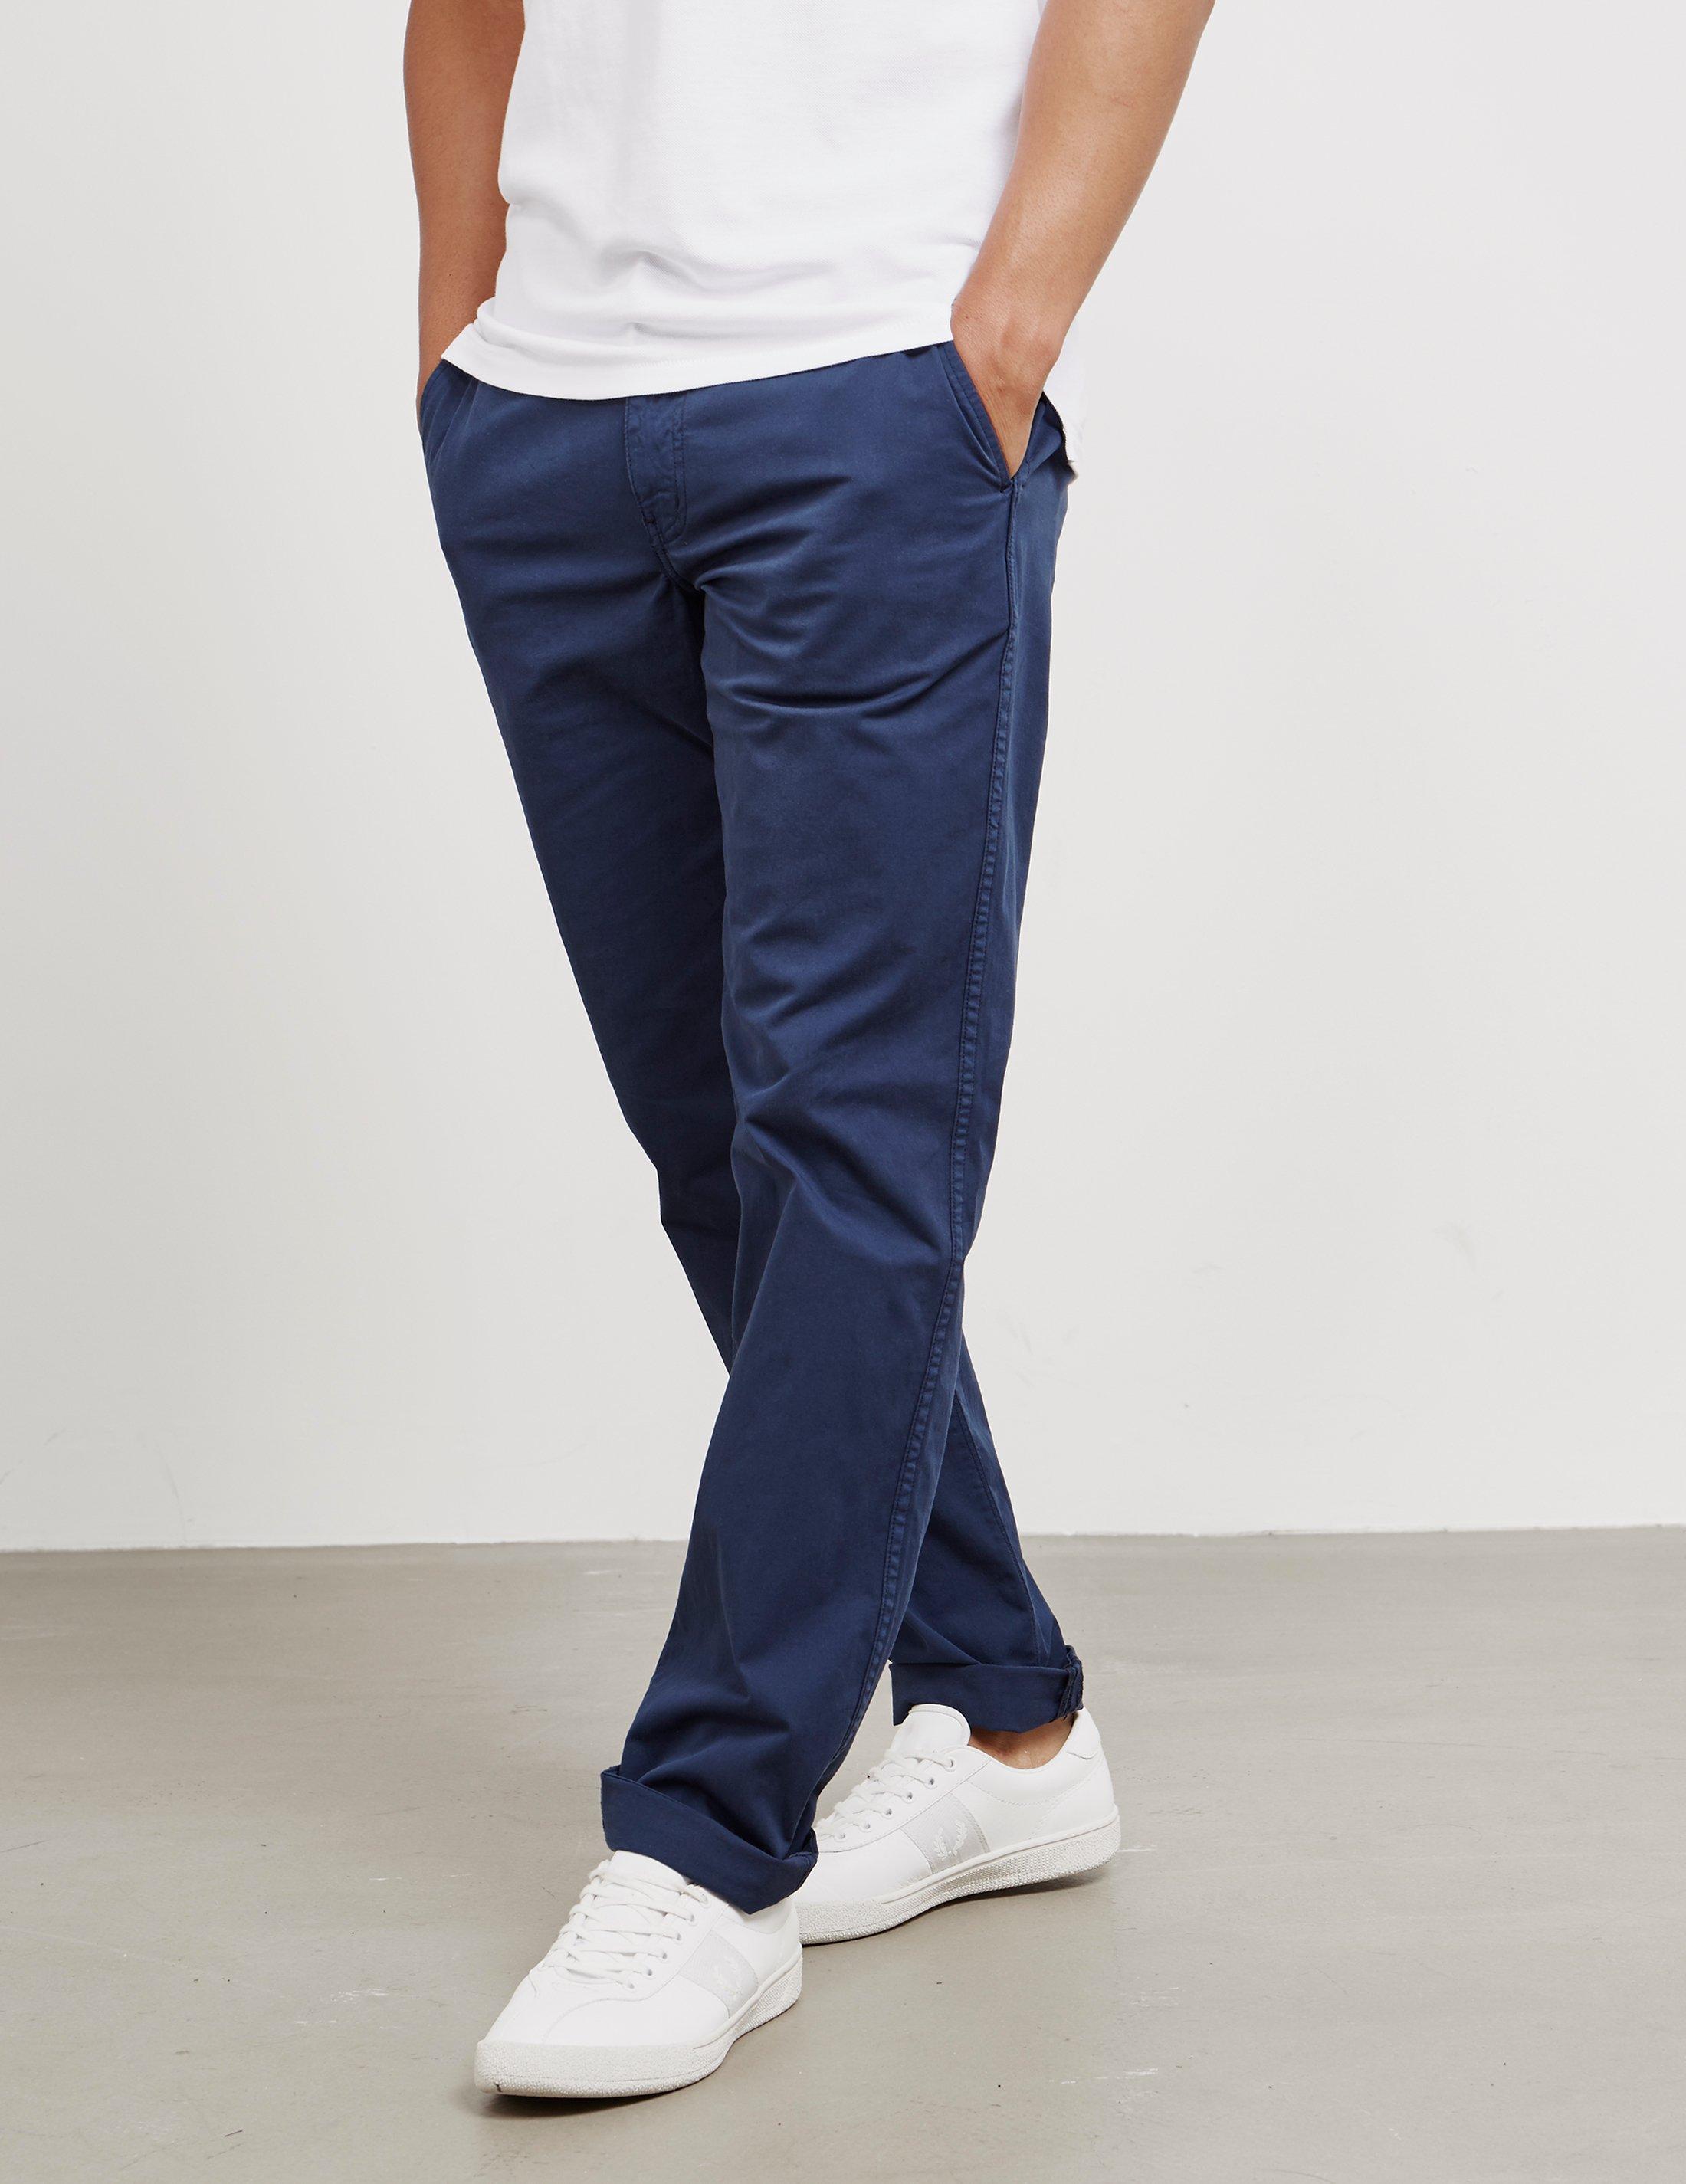 PS by Paul Smith Cotton Mens Pima Tapered Chinos Navy Blue for Men - Lyst